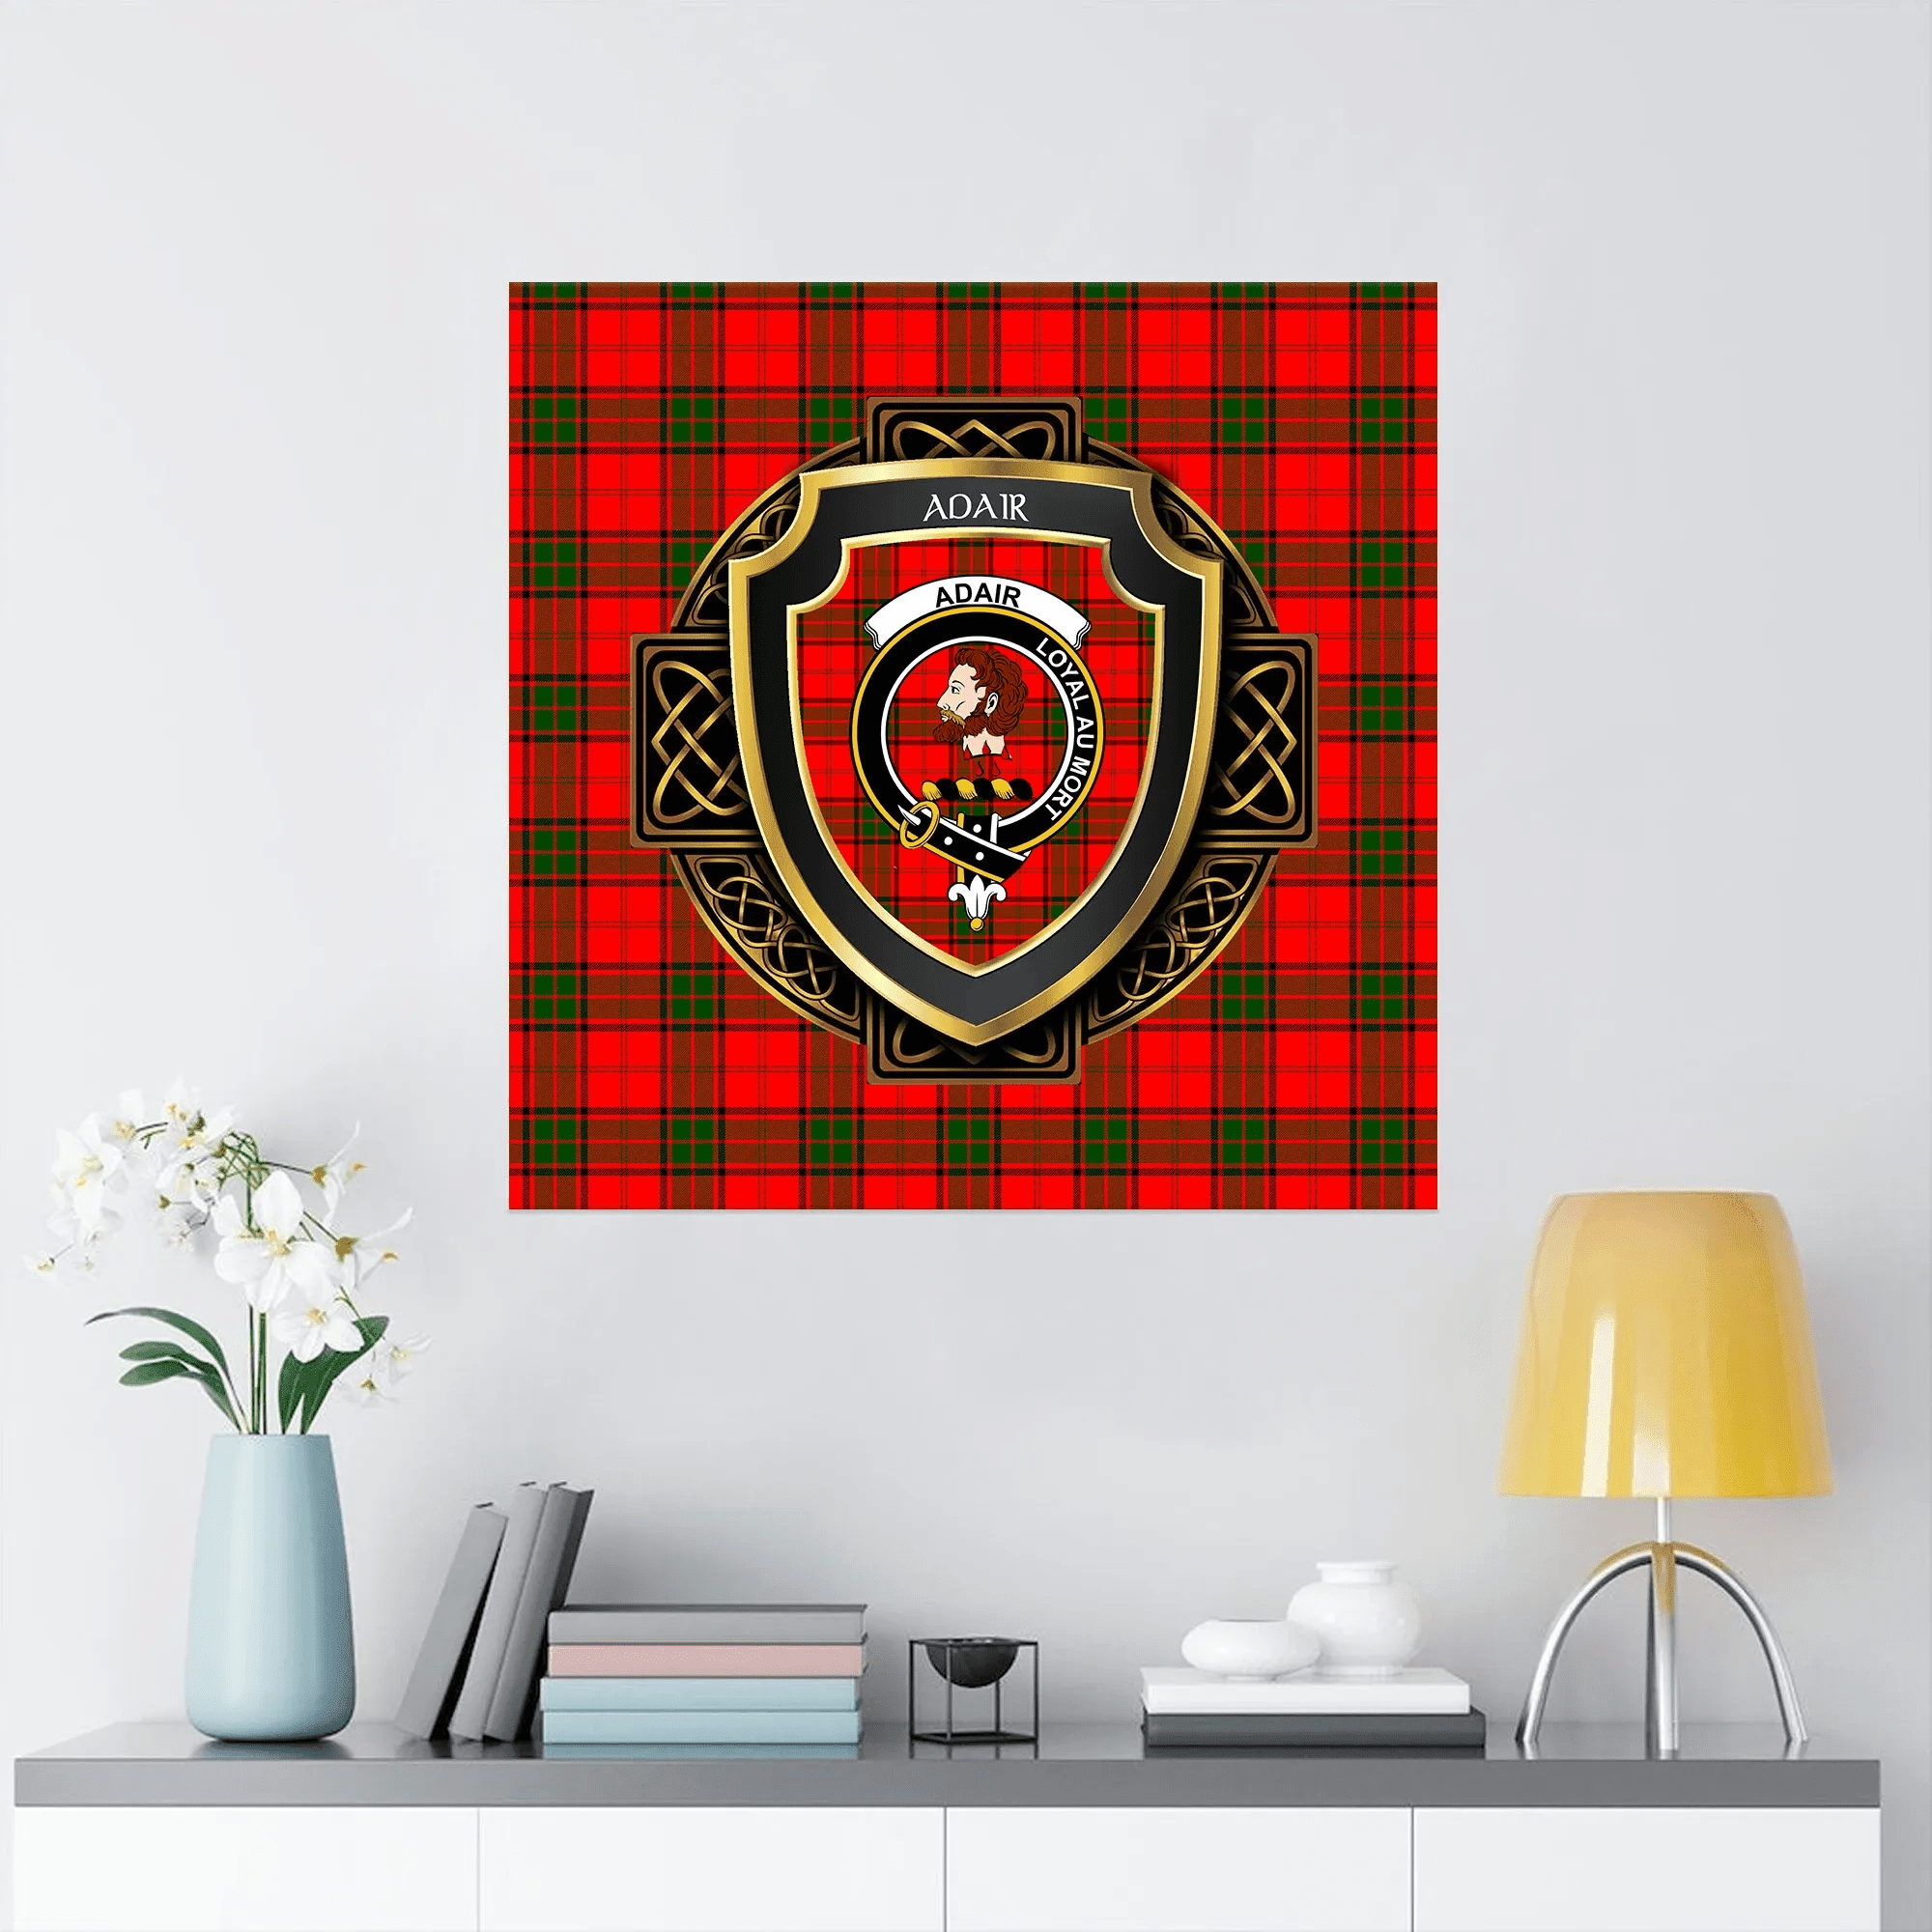 Adair  Family Crest Personalized Canvas Wall Art Prints Scotland Gift